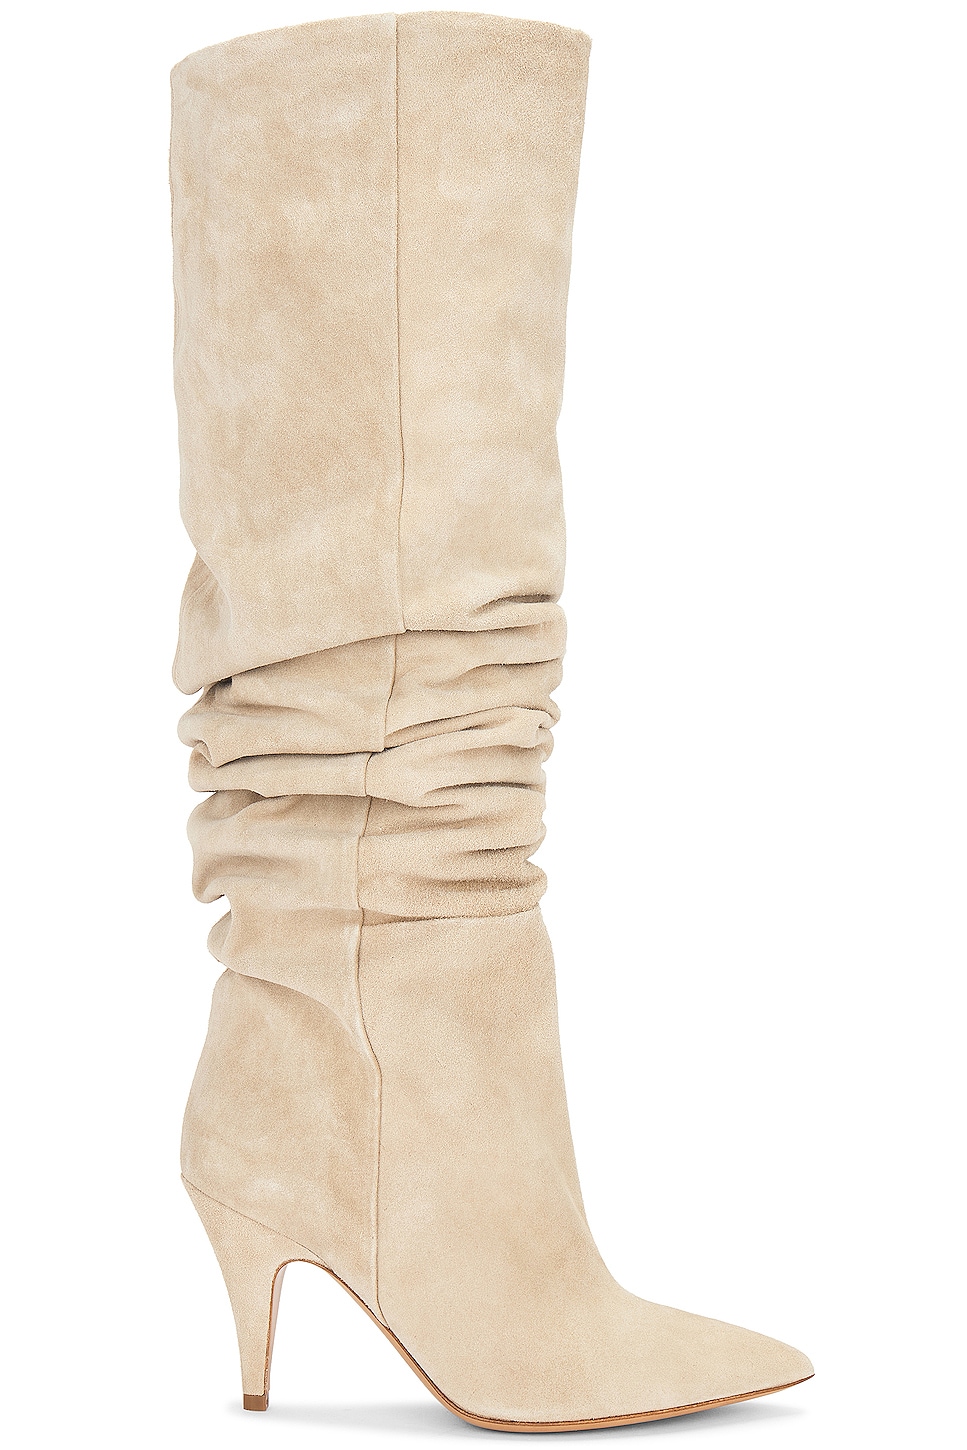 Image 1 of KHAITE River Knee High Boot in Nude